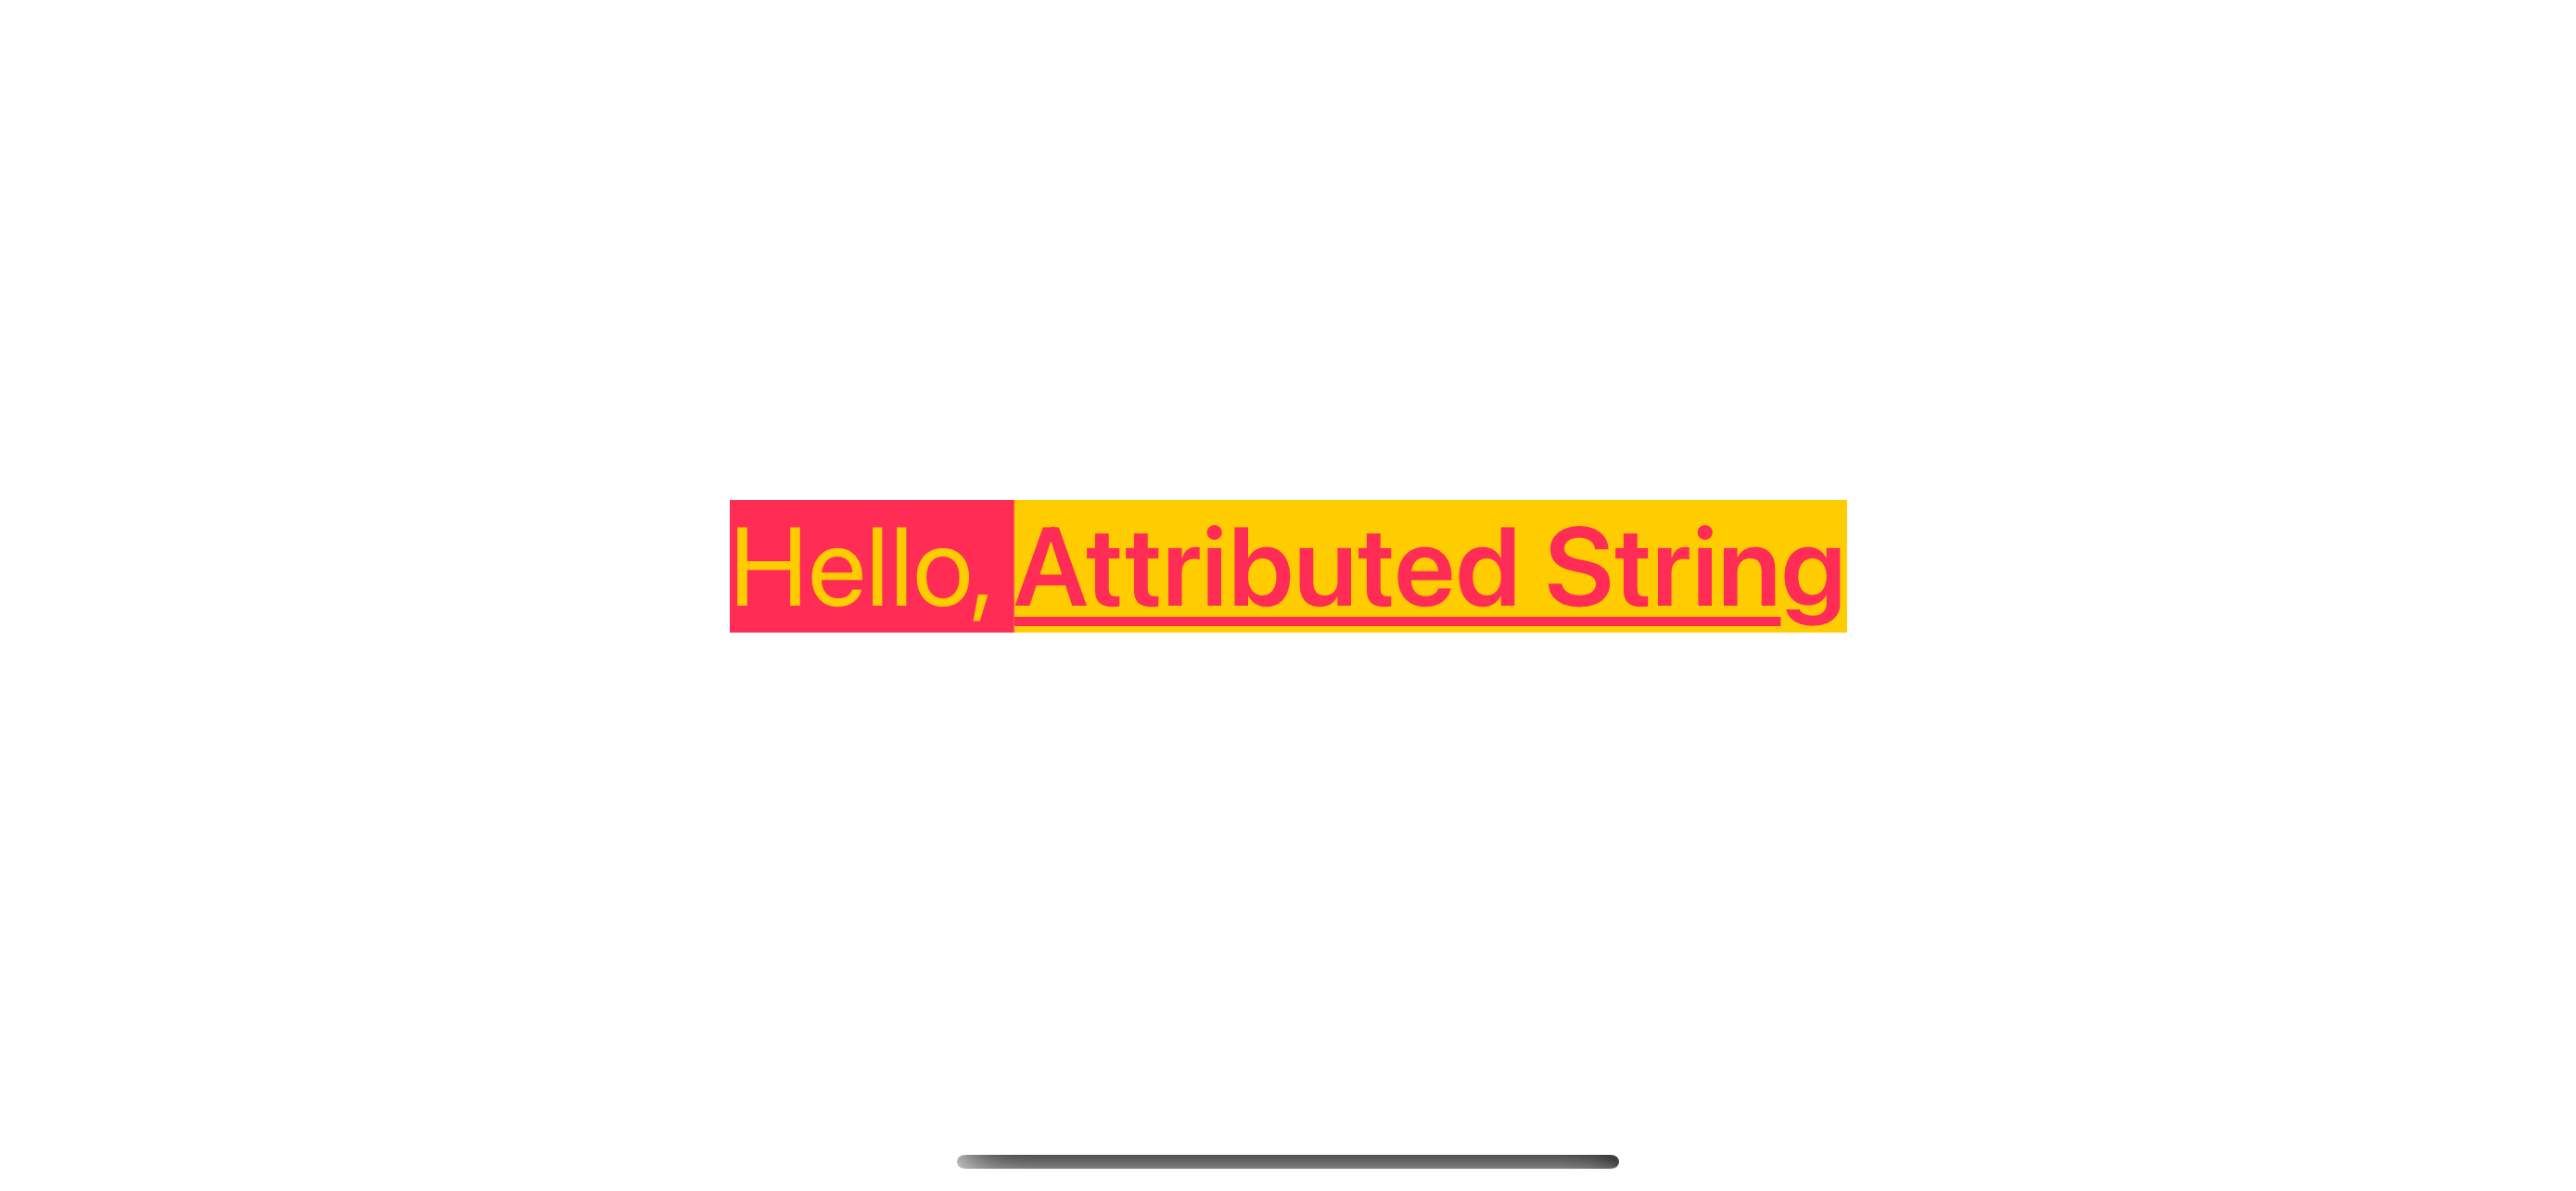 Concatenate Two AttributedString